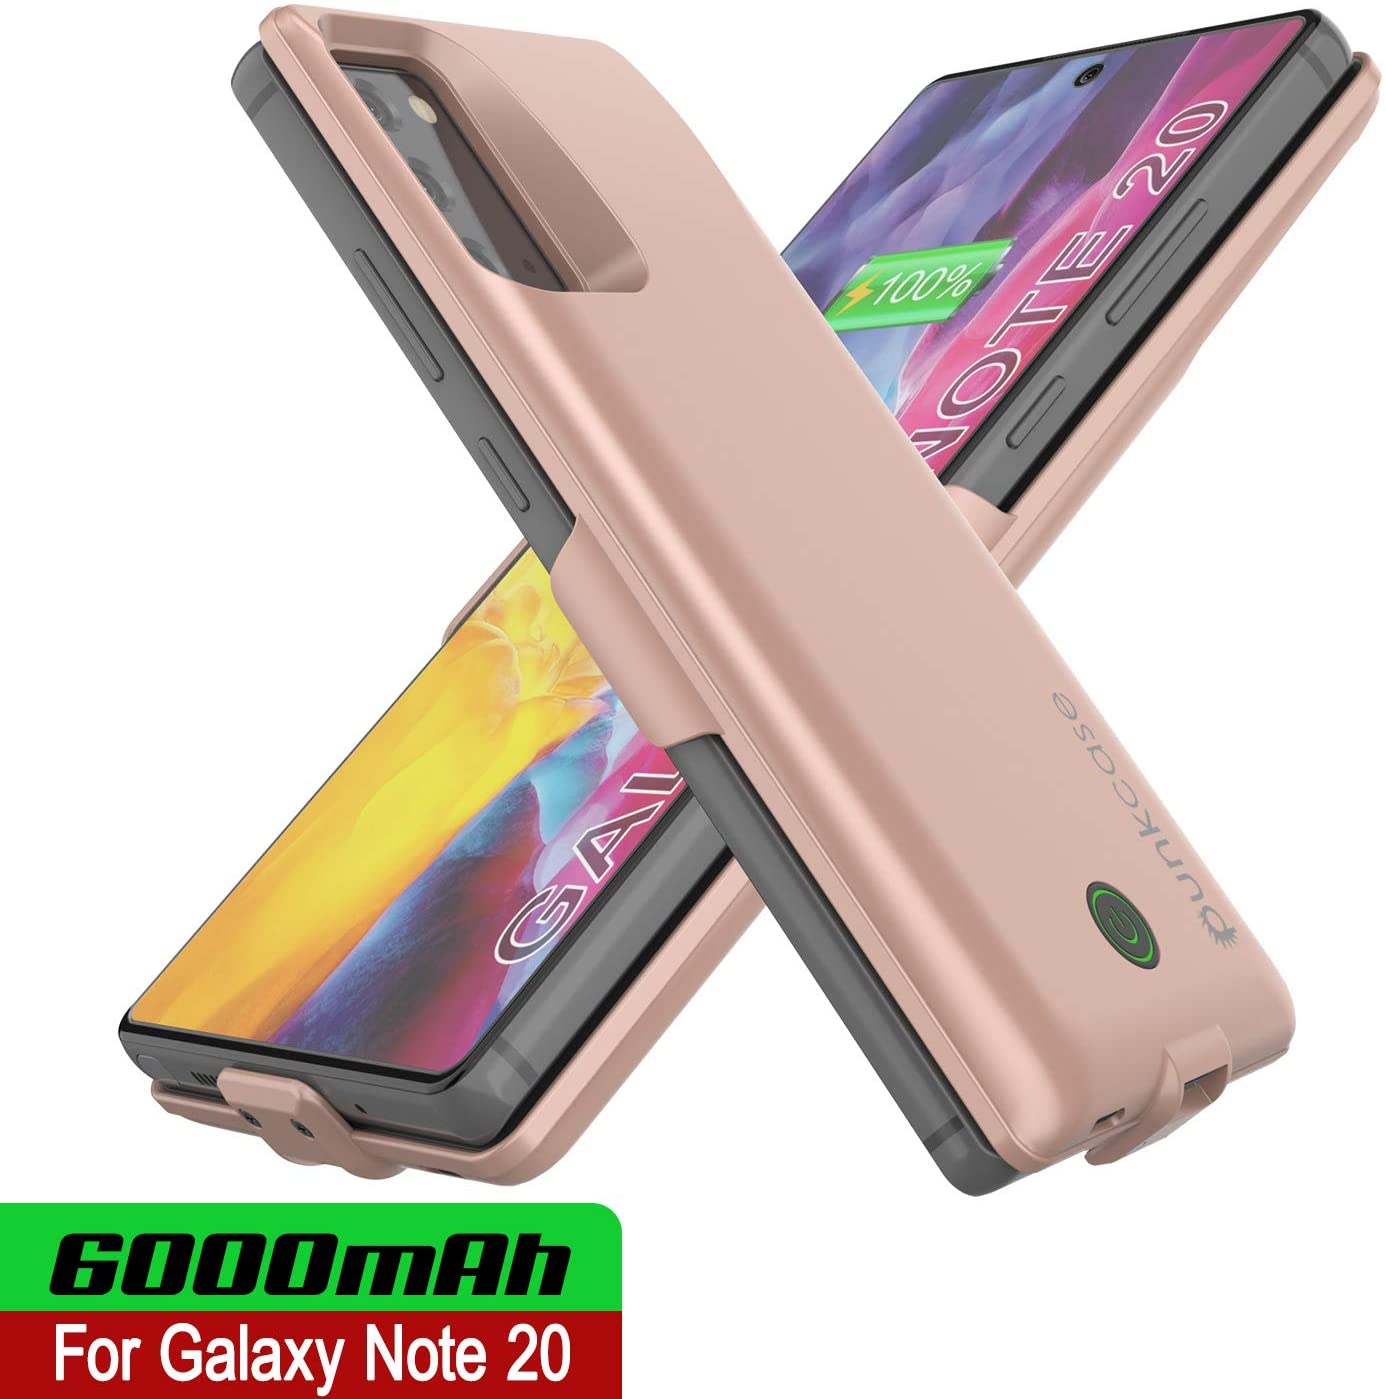 Galaxy Note 20 6000mAH Battery Charger PunkJuice 2.0 Slim Case [Rose-Gold]